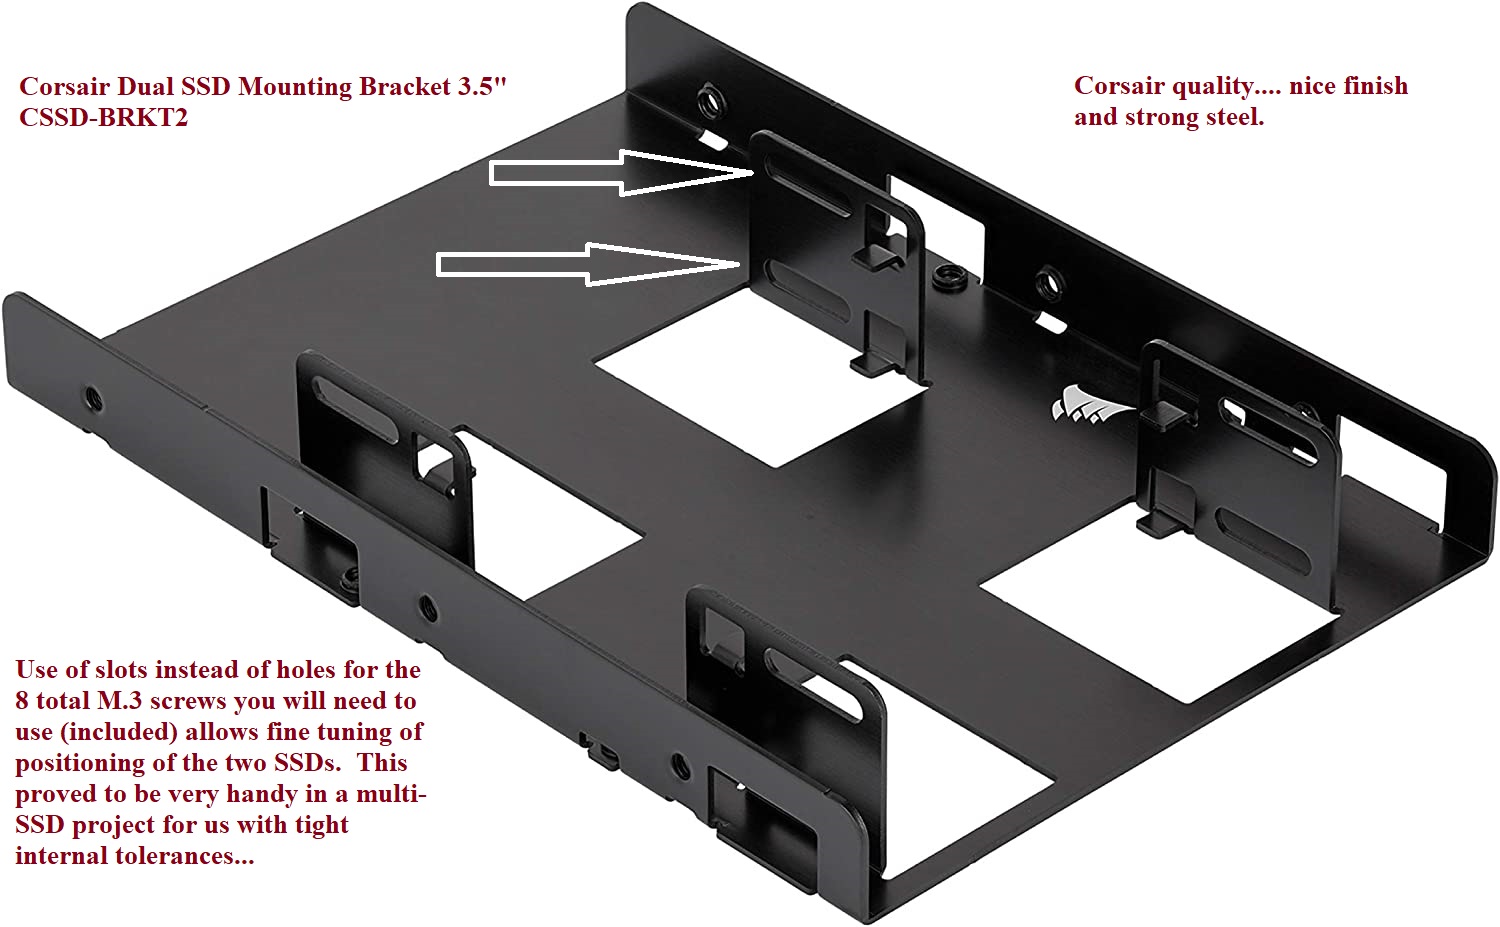 4 x M.2 SATA Mounting Adapter for 3.5in Drive Bay